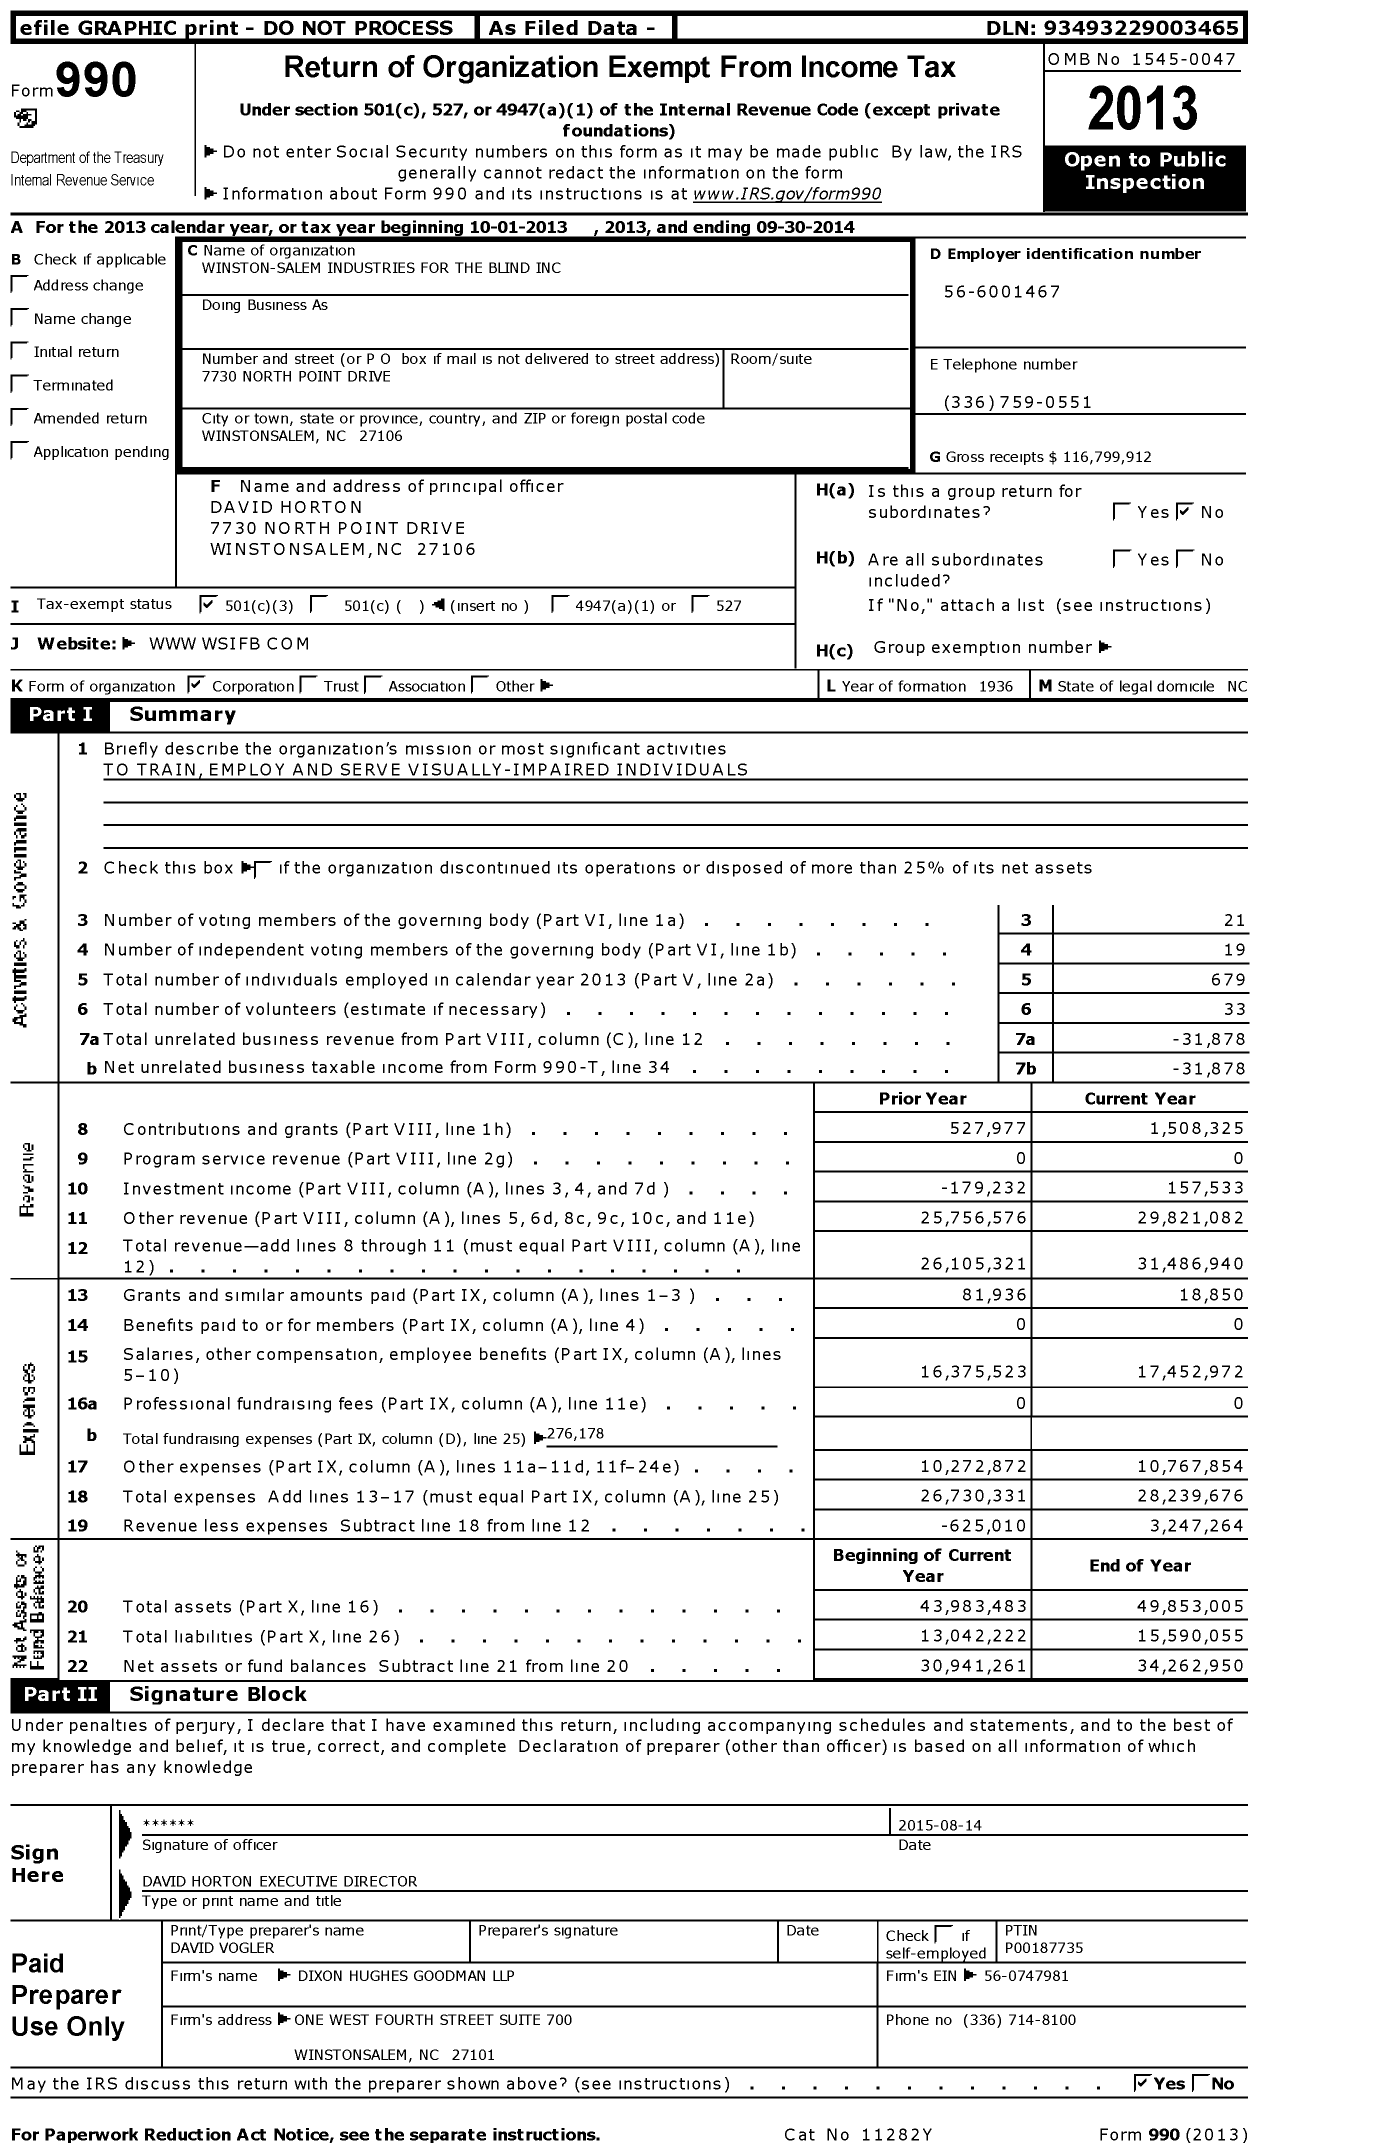 Image of first page of 2013 Form 990 for Ifb Solutions (IFB)